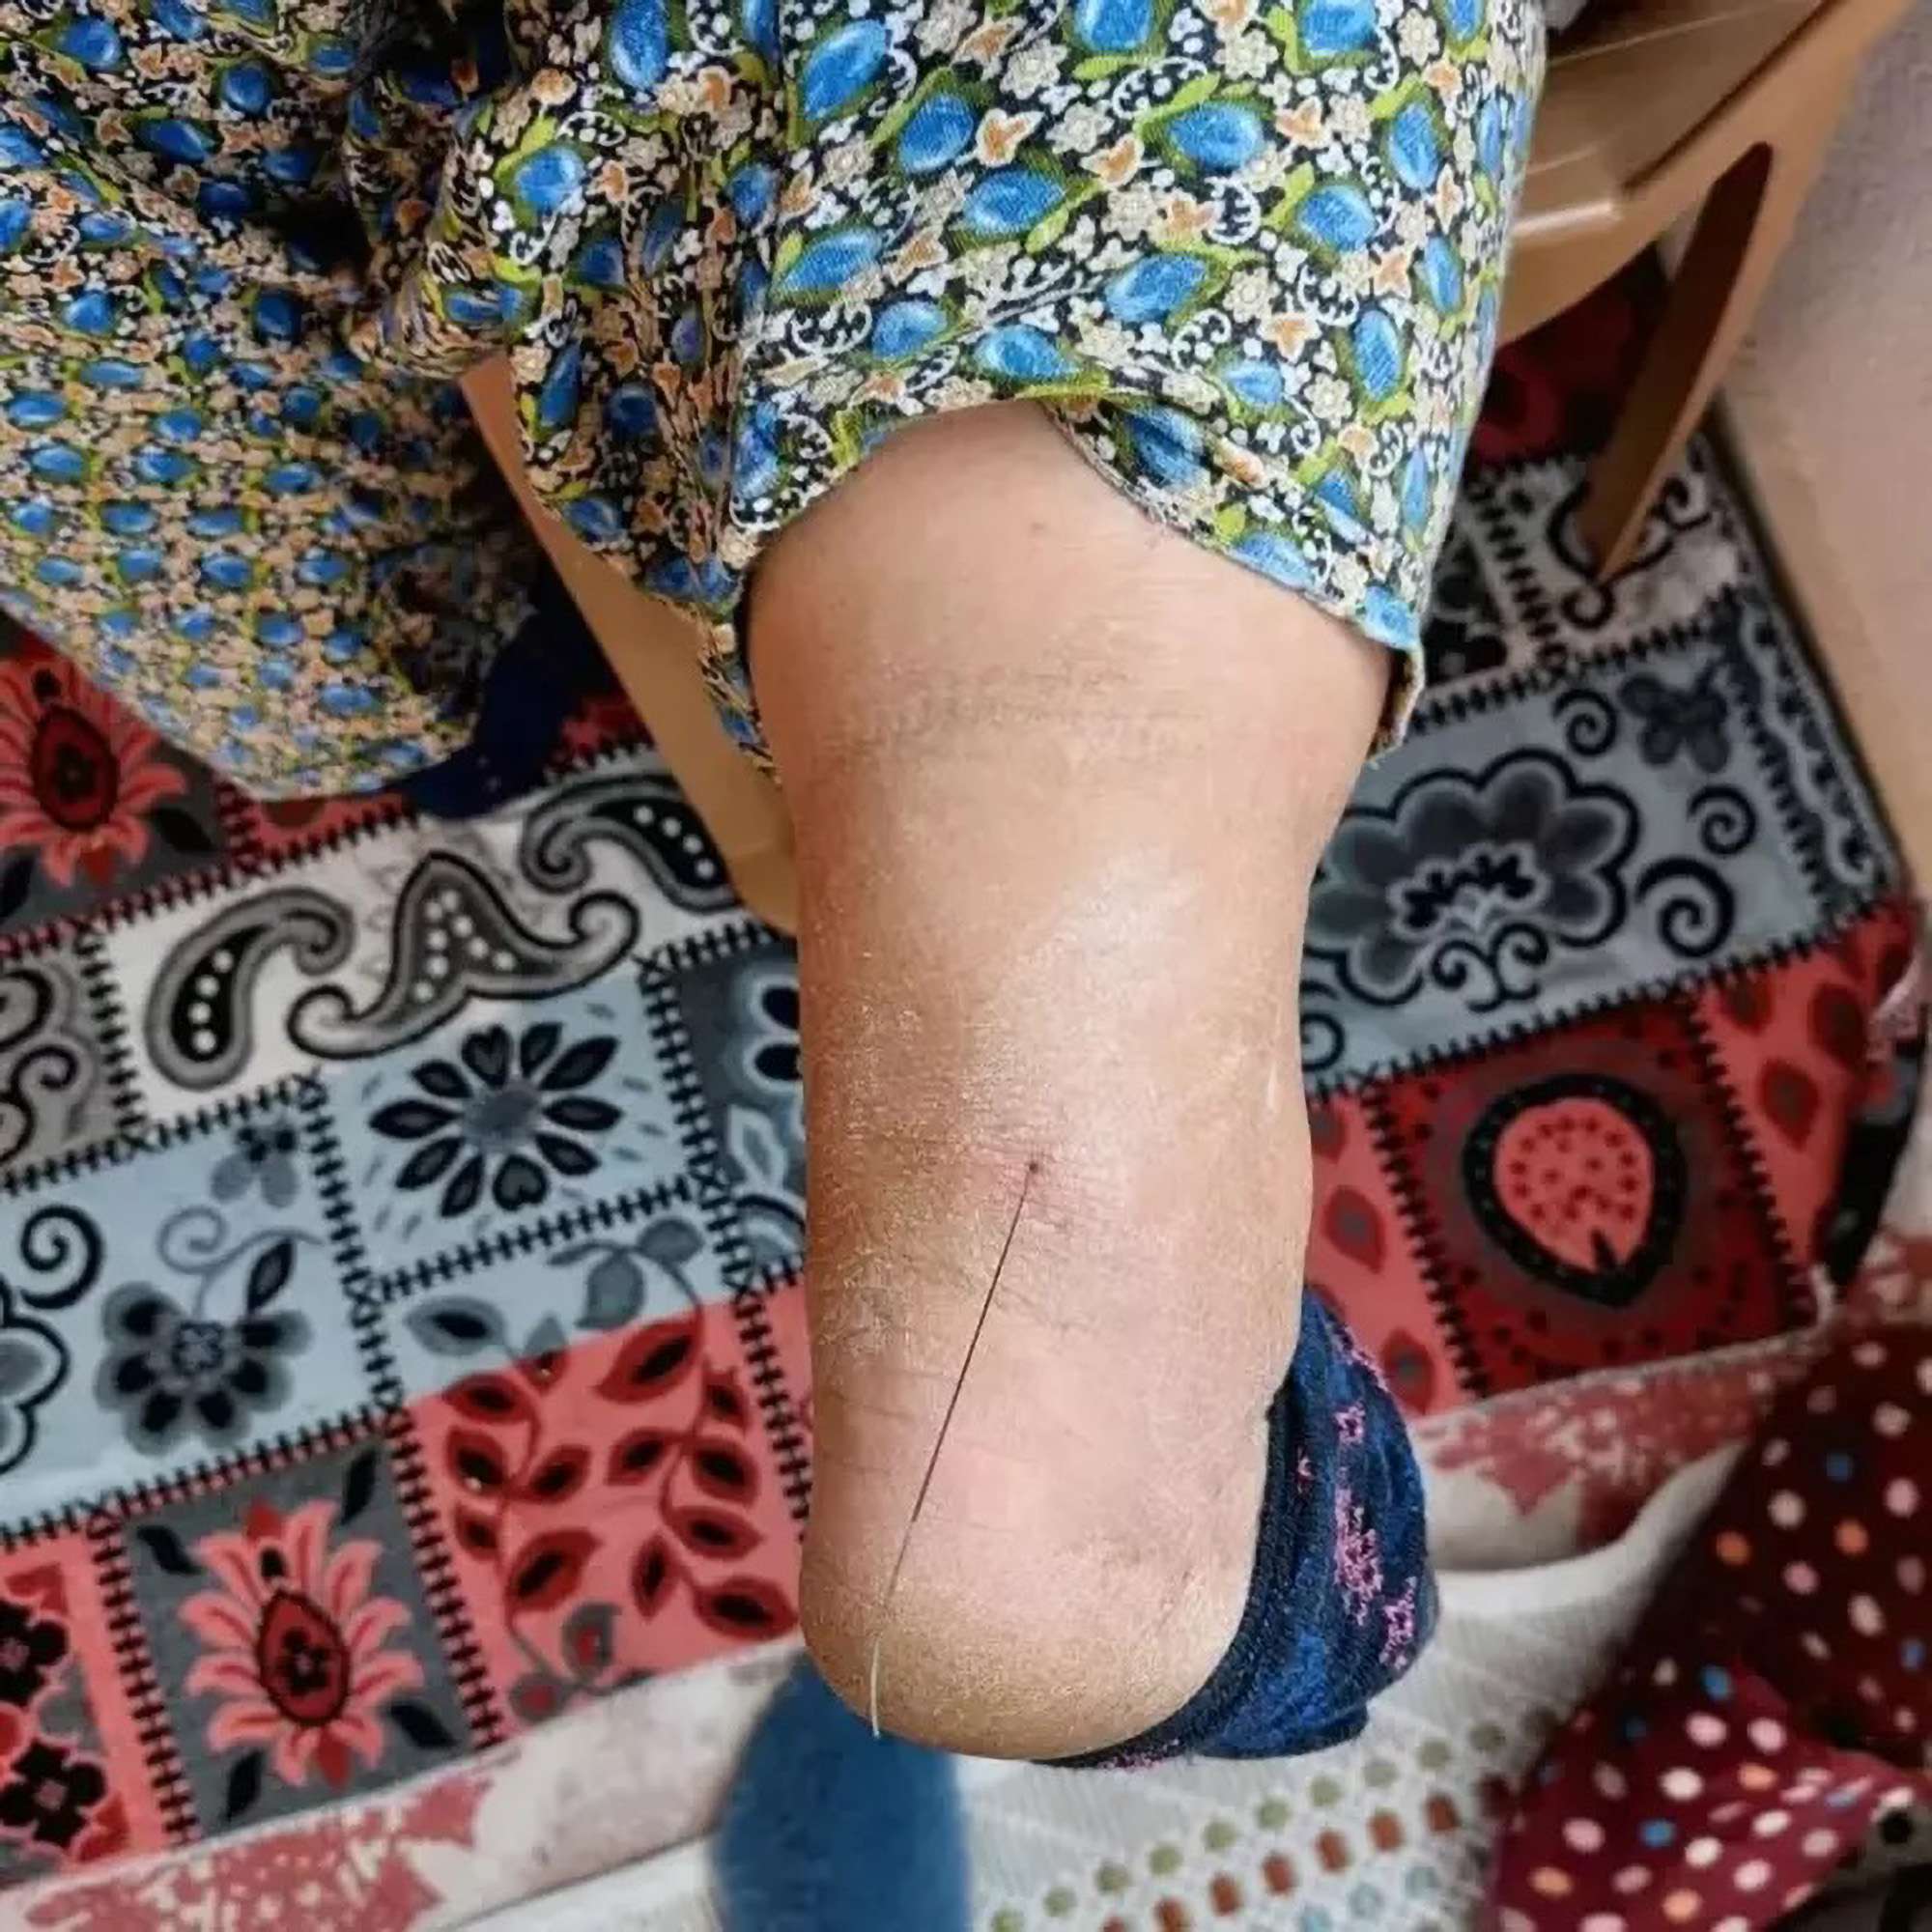 Baffled Surgeons Pull 14-Inch Wire From Woman’s Heel